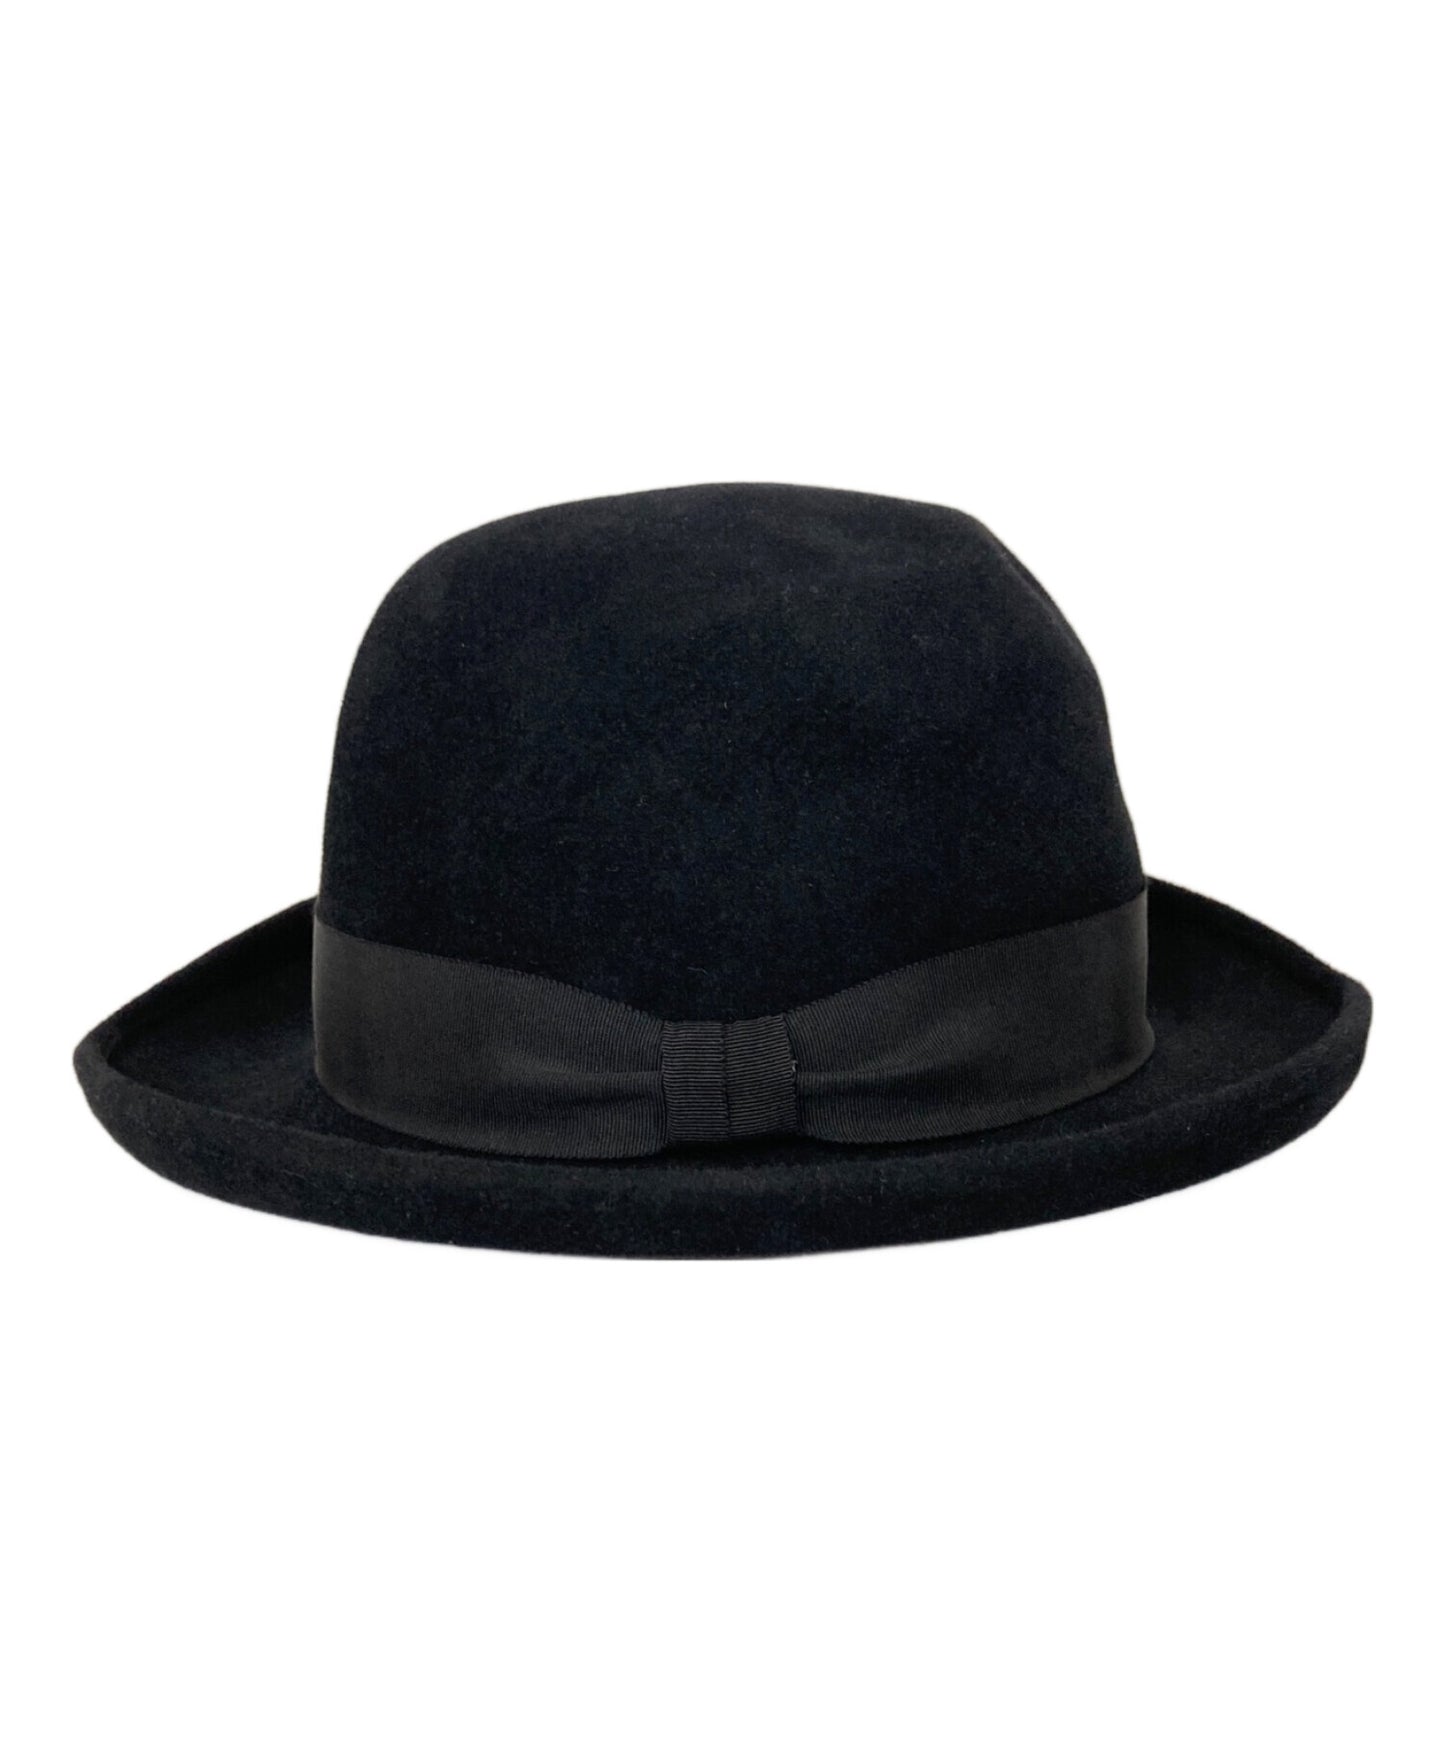 [Pre-owned] Yohji Yamamoto pour homme hat HE-H02-505